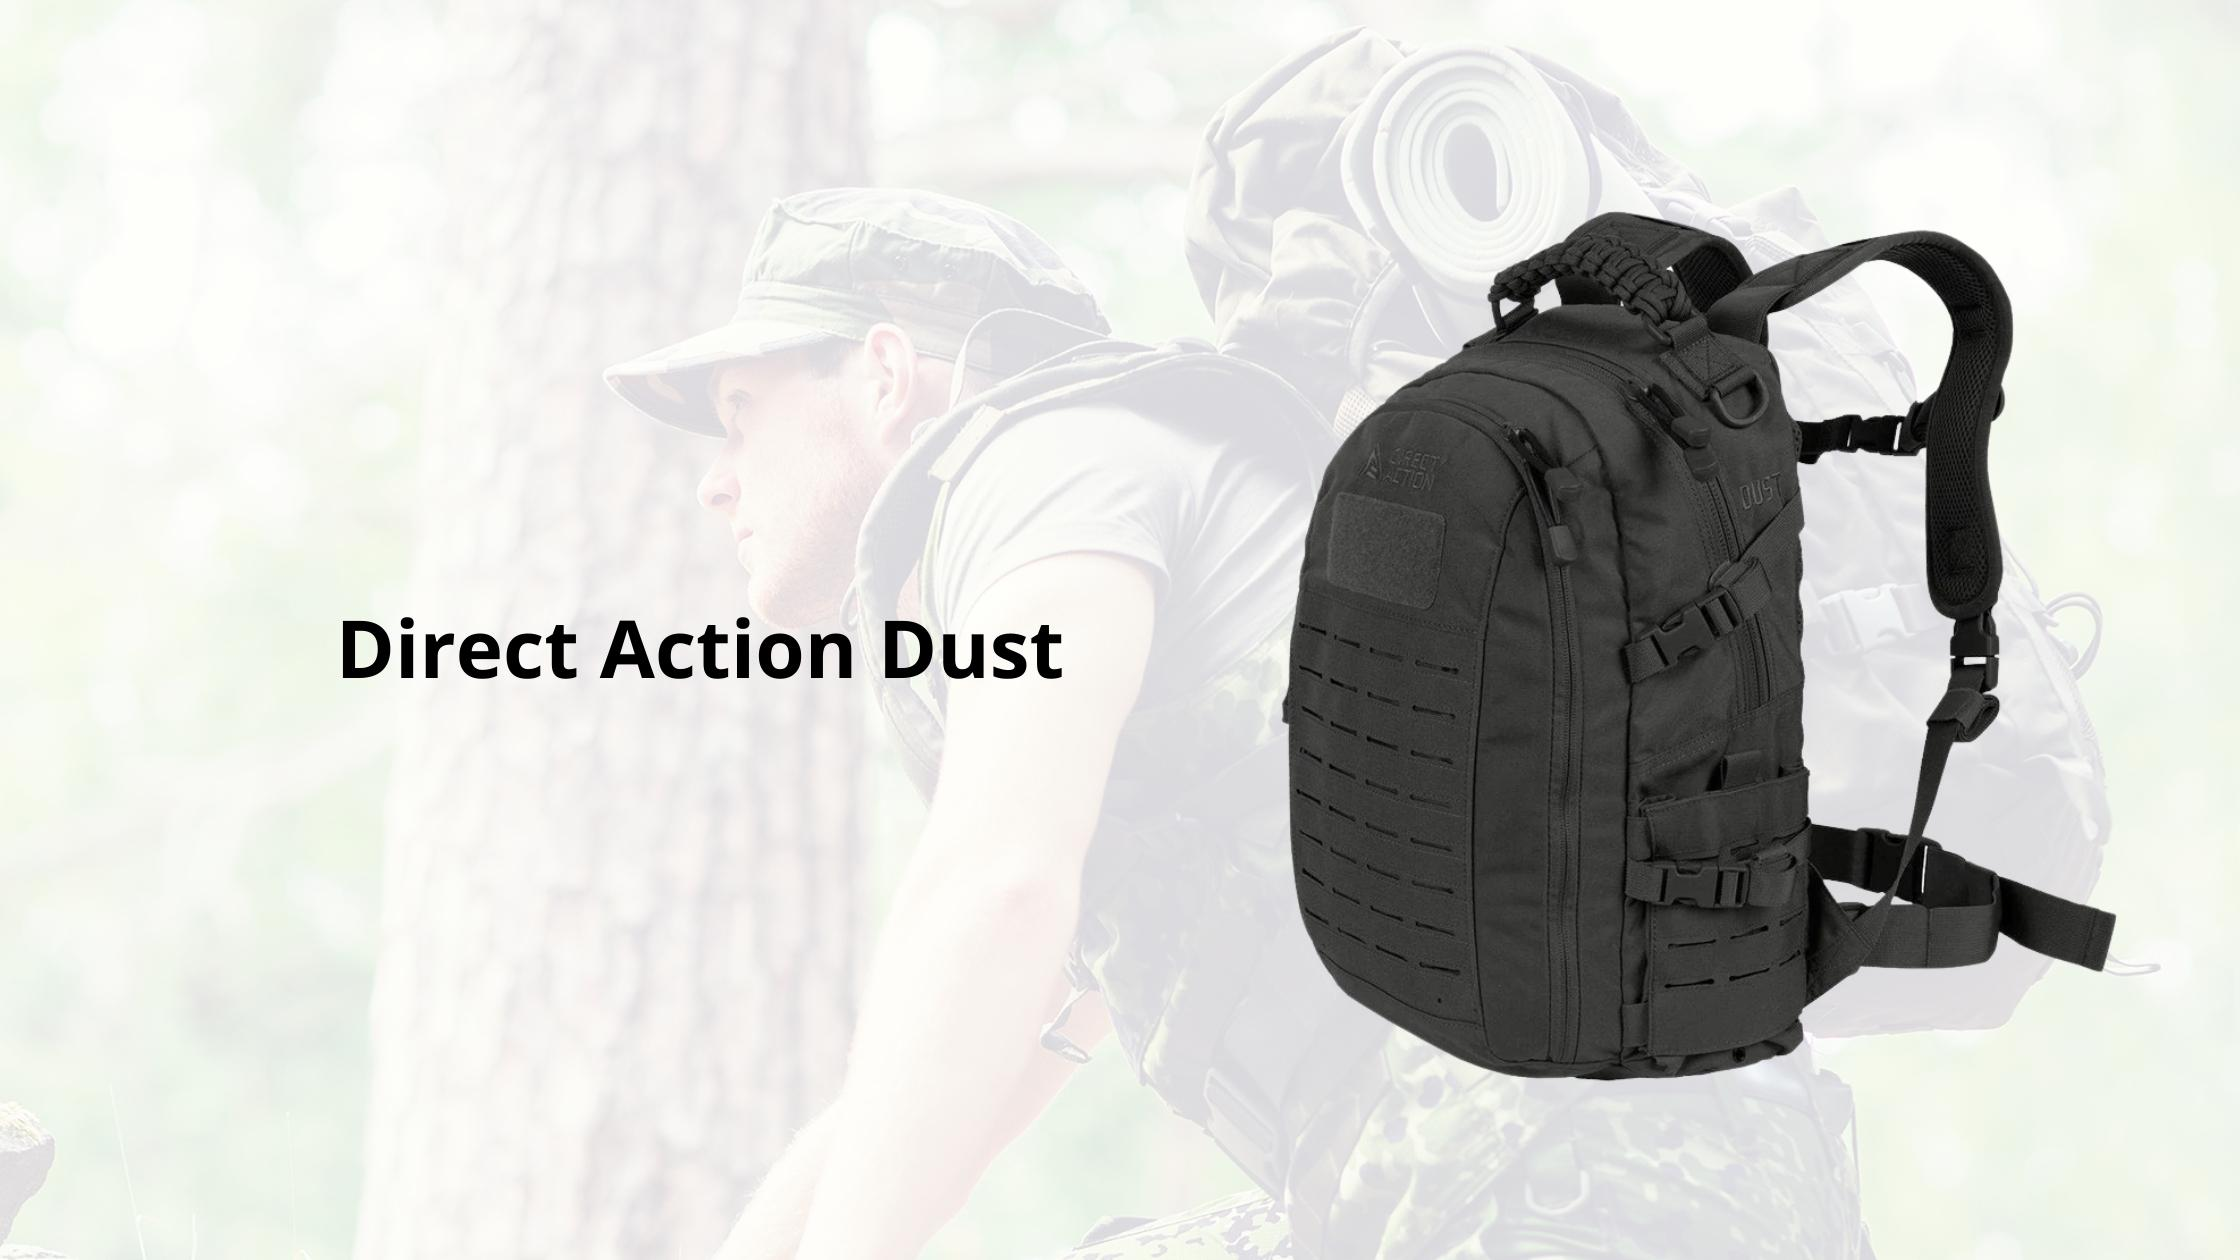 Direct Action Dust Tactical Backpack with shoulder strap